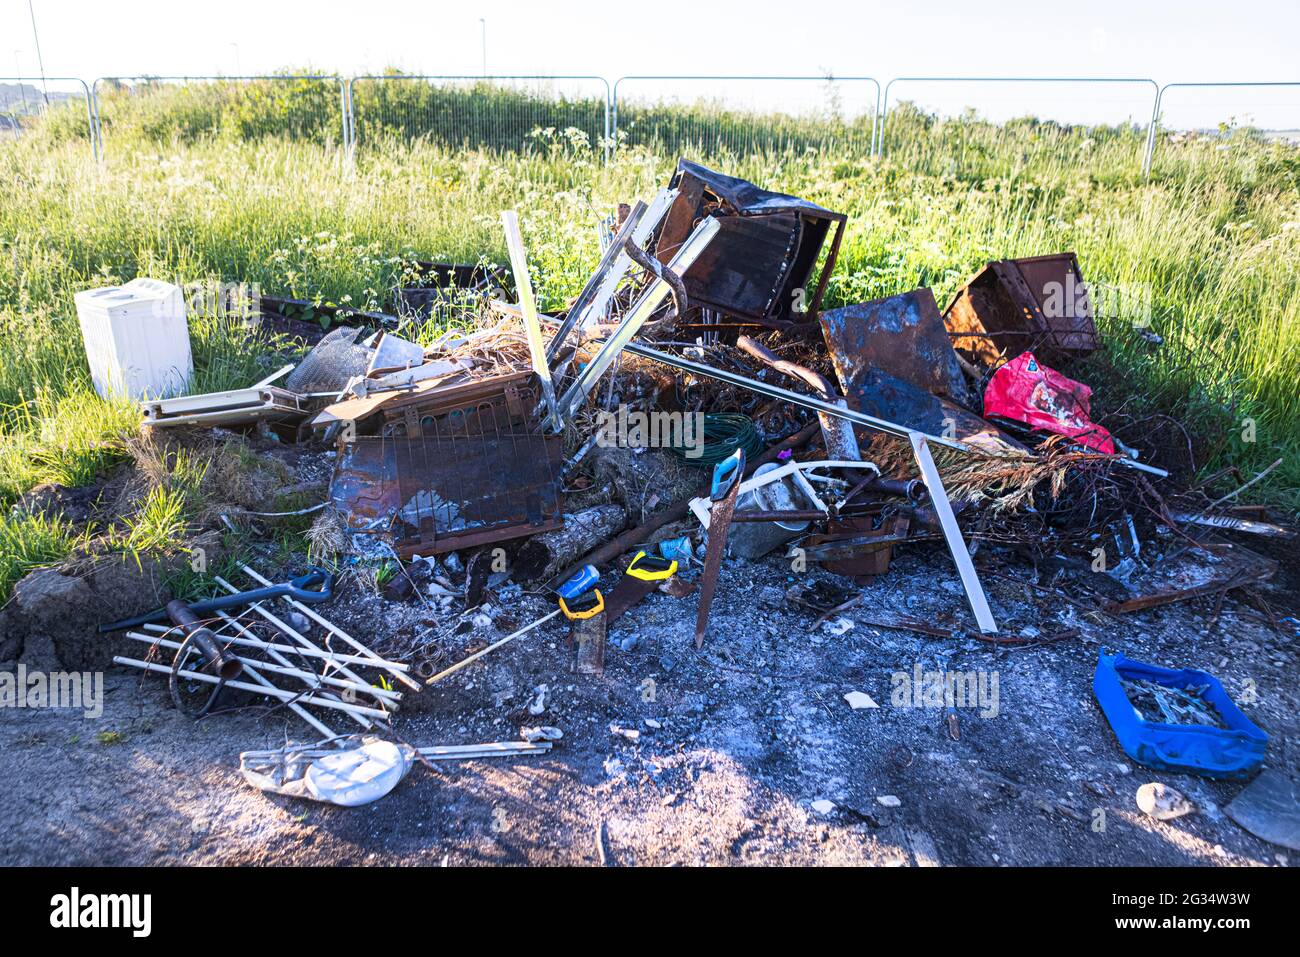 Waste dumped in the countryside, an illegal social issue, fly tipping is causing environmental pollution. Stock Photo